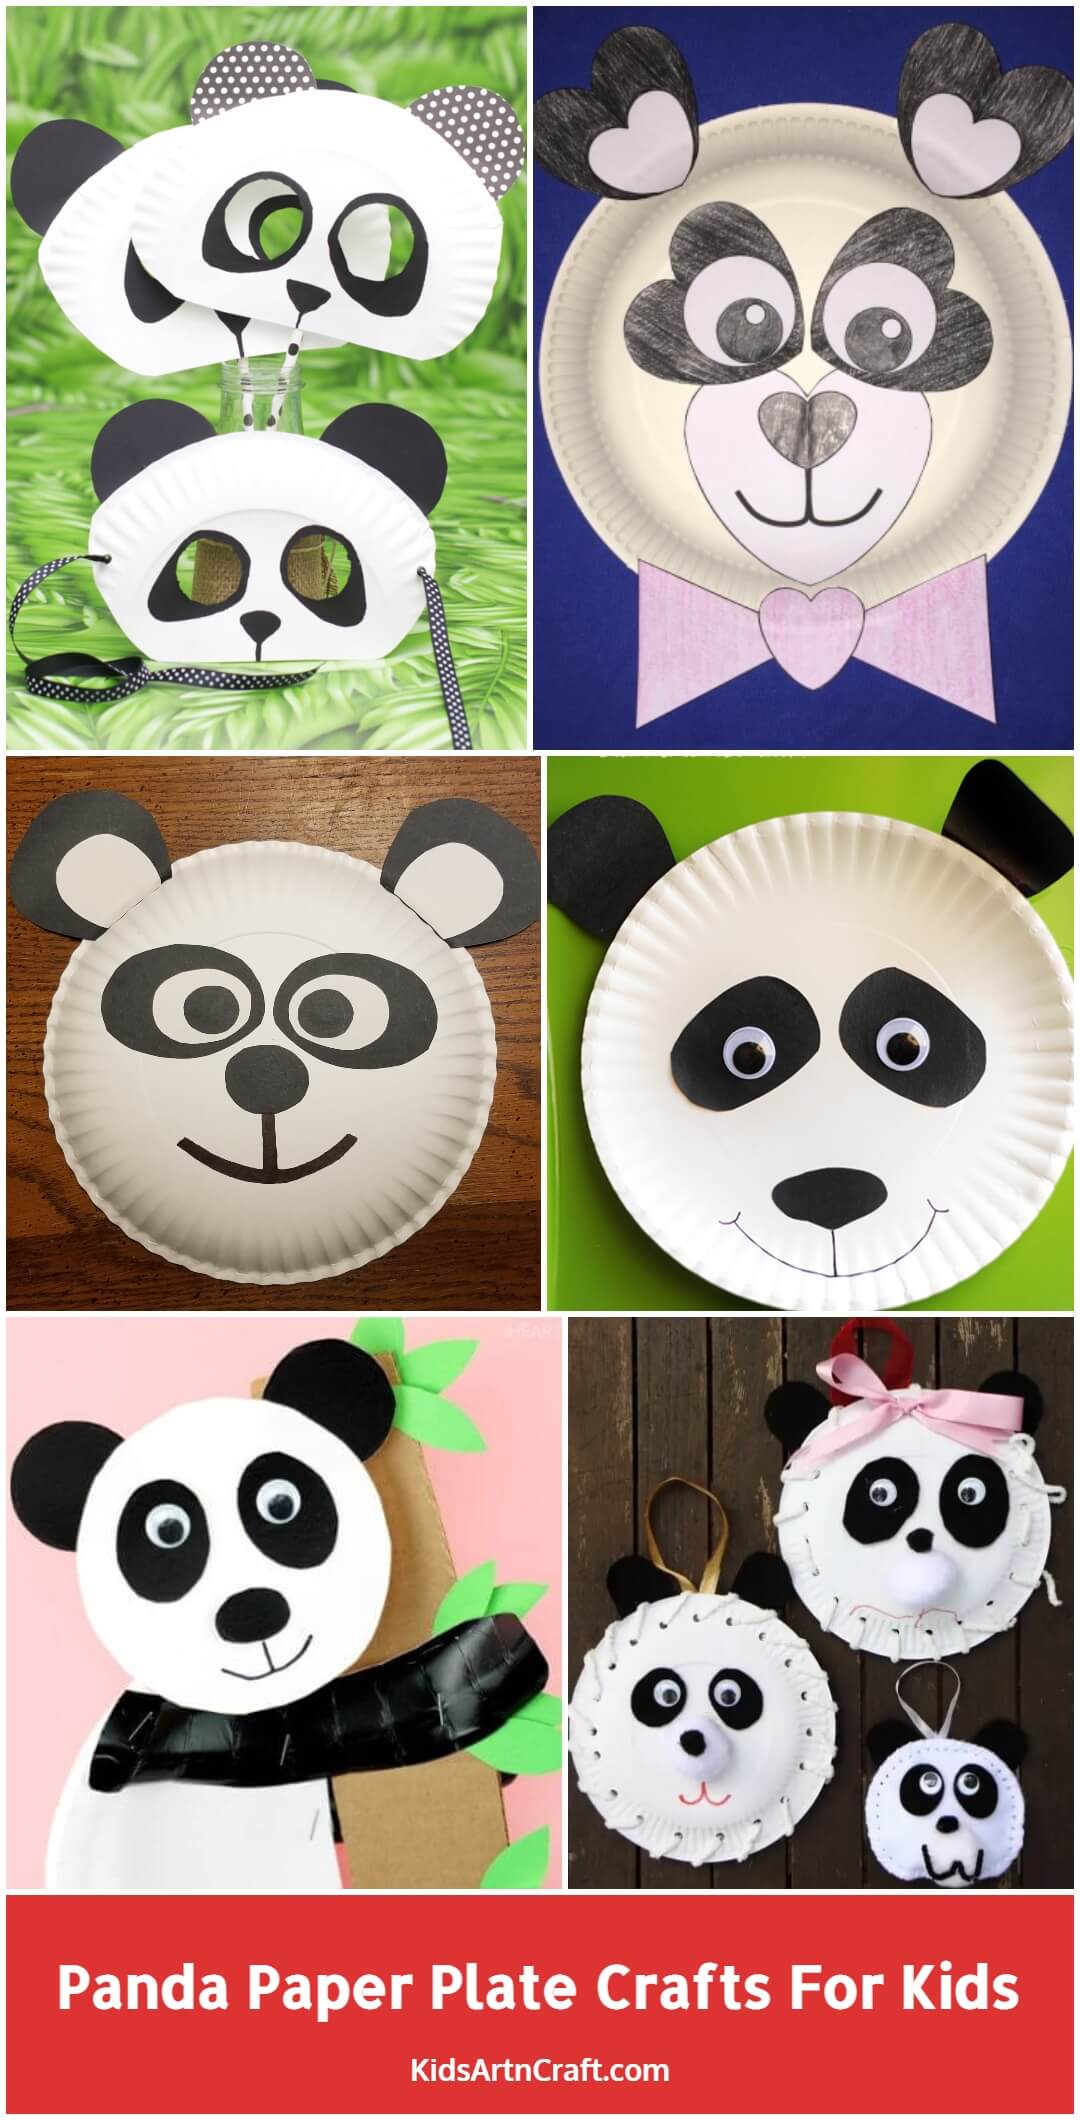 Panda Paper Plate Crafts for Kids